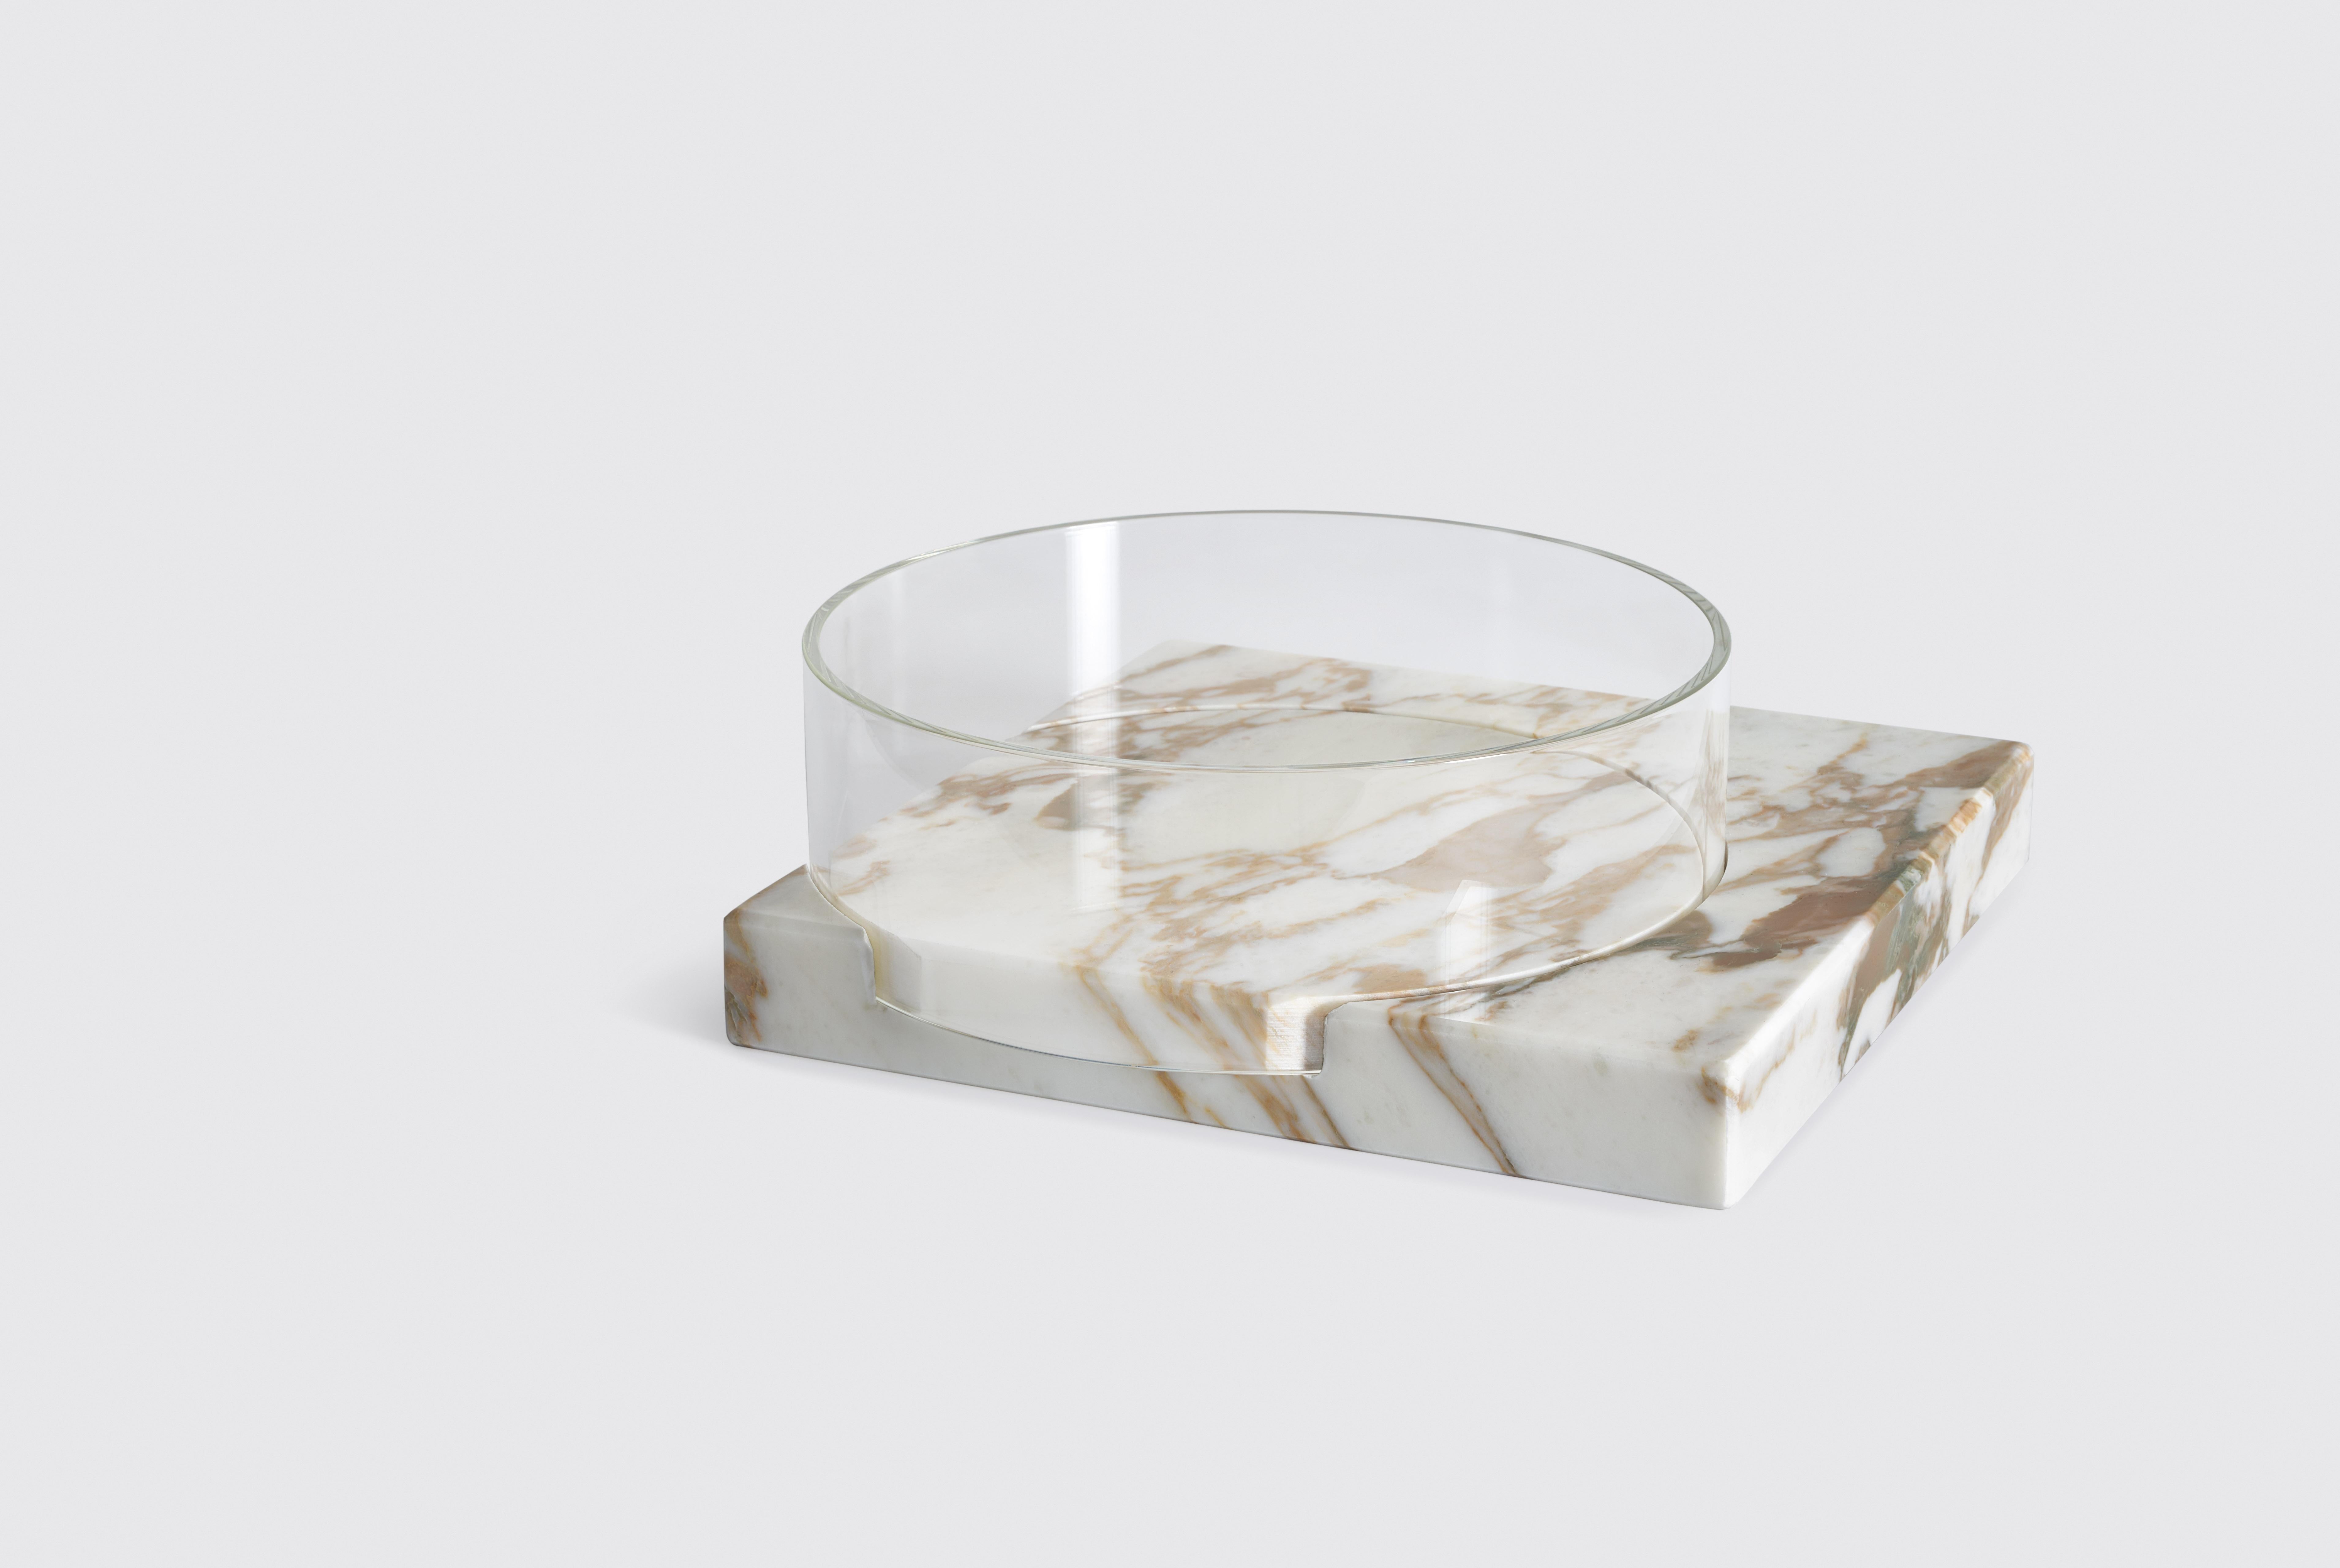 Large Segno bowl - Giorgio Bonaguro
Dimensions: D 28 x W 28 x H 11 cm
Materials: Calacatta Oro marble, glass.

A collection that was born from the desire to recover marble processing waste: small portions of slabs with different thickness,